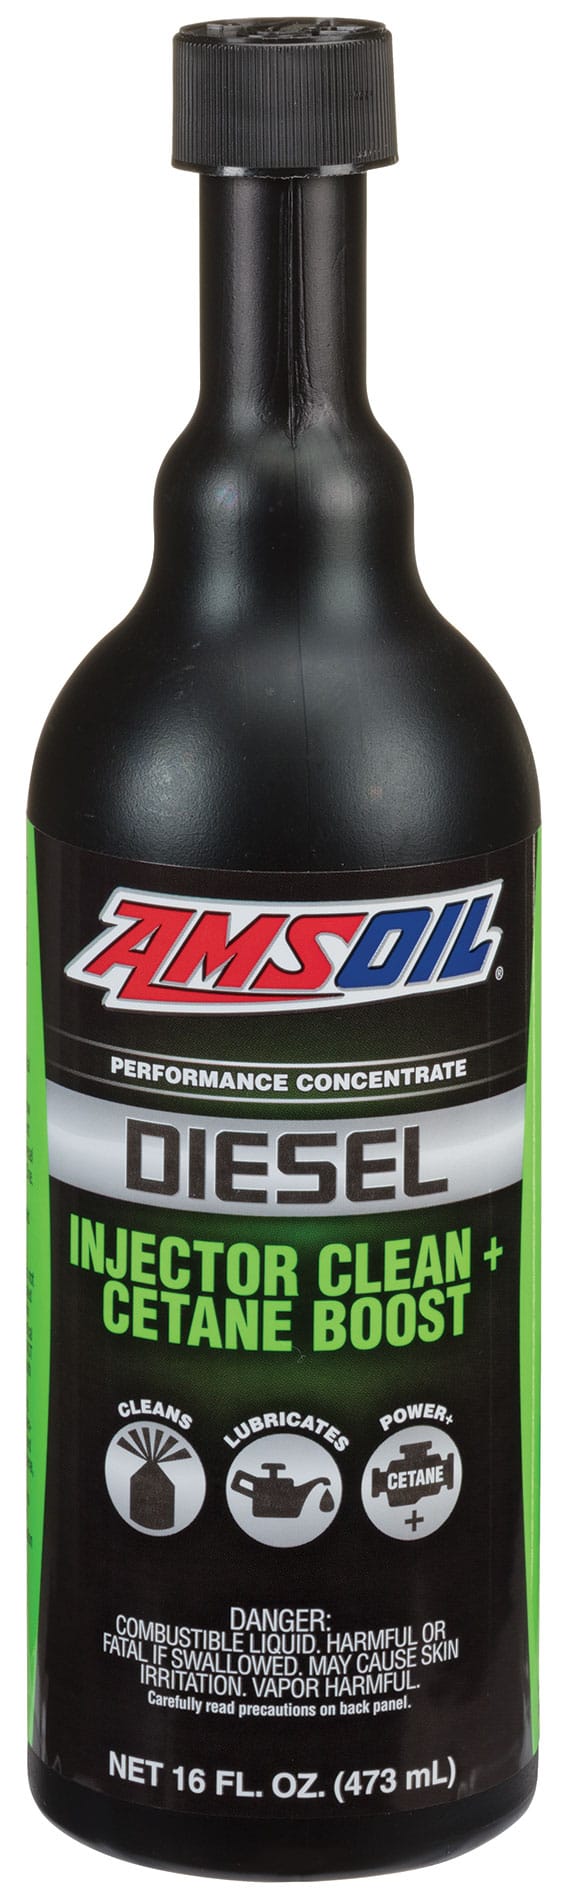 A bottle of AMSOIL Injector Clean and Cetane Boost, specially engineered to defend your engine and fuel system against performance-robbing wear and deposits.